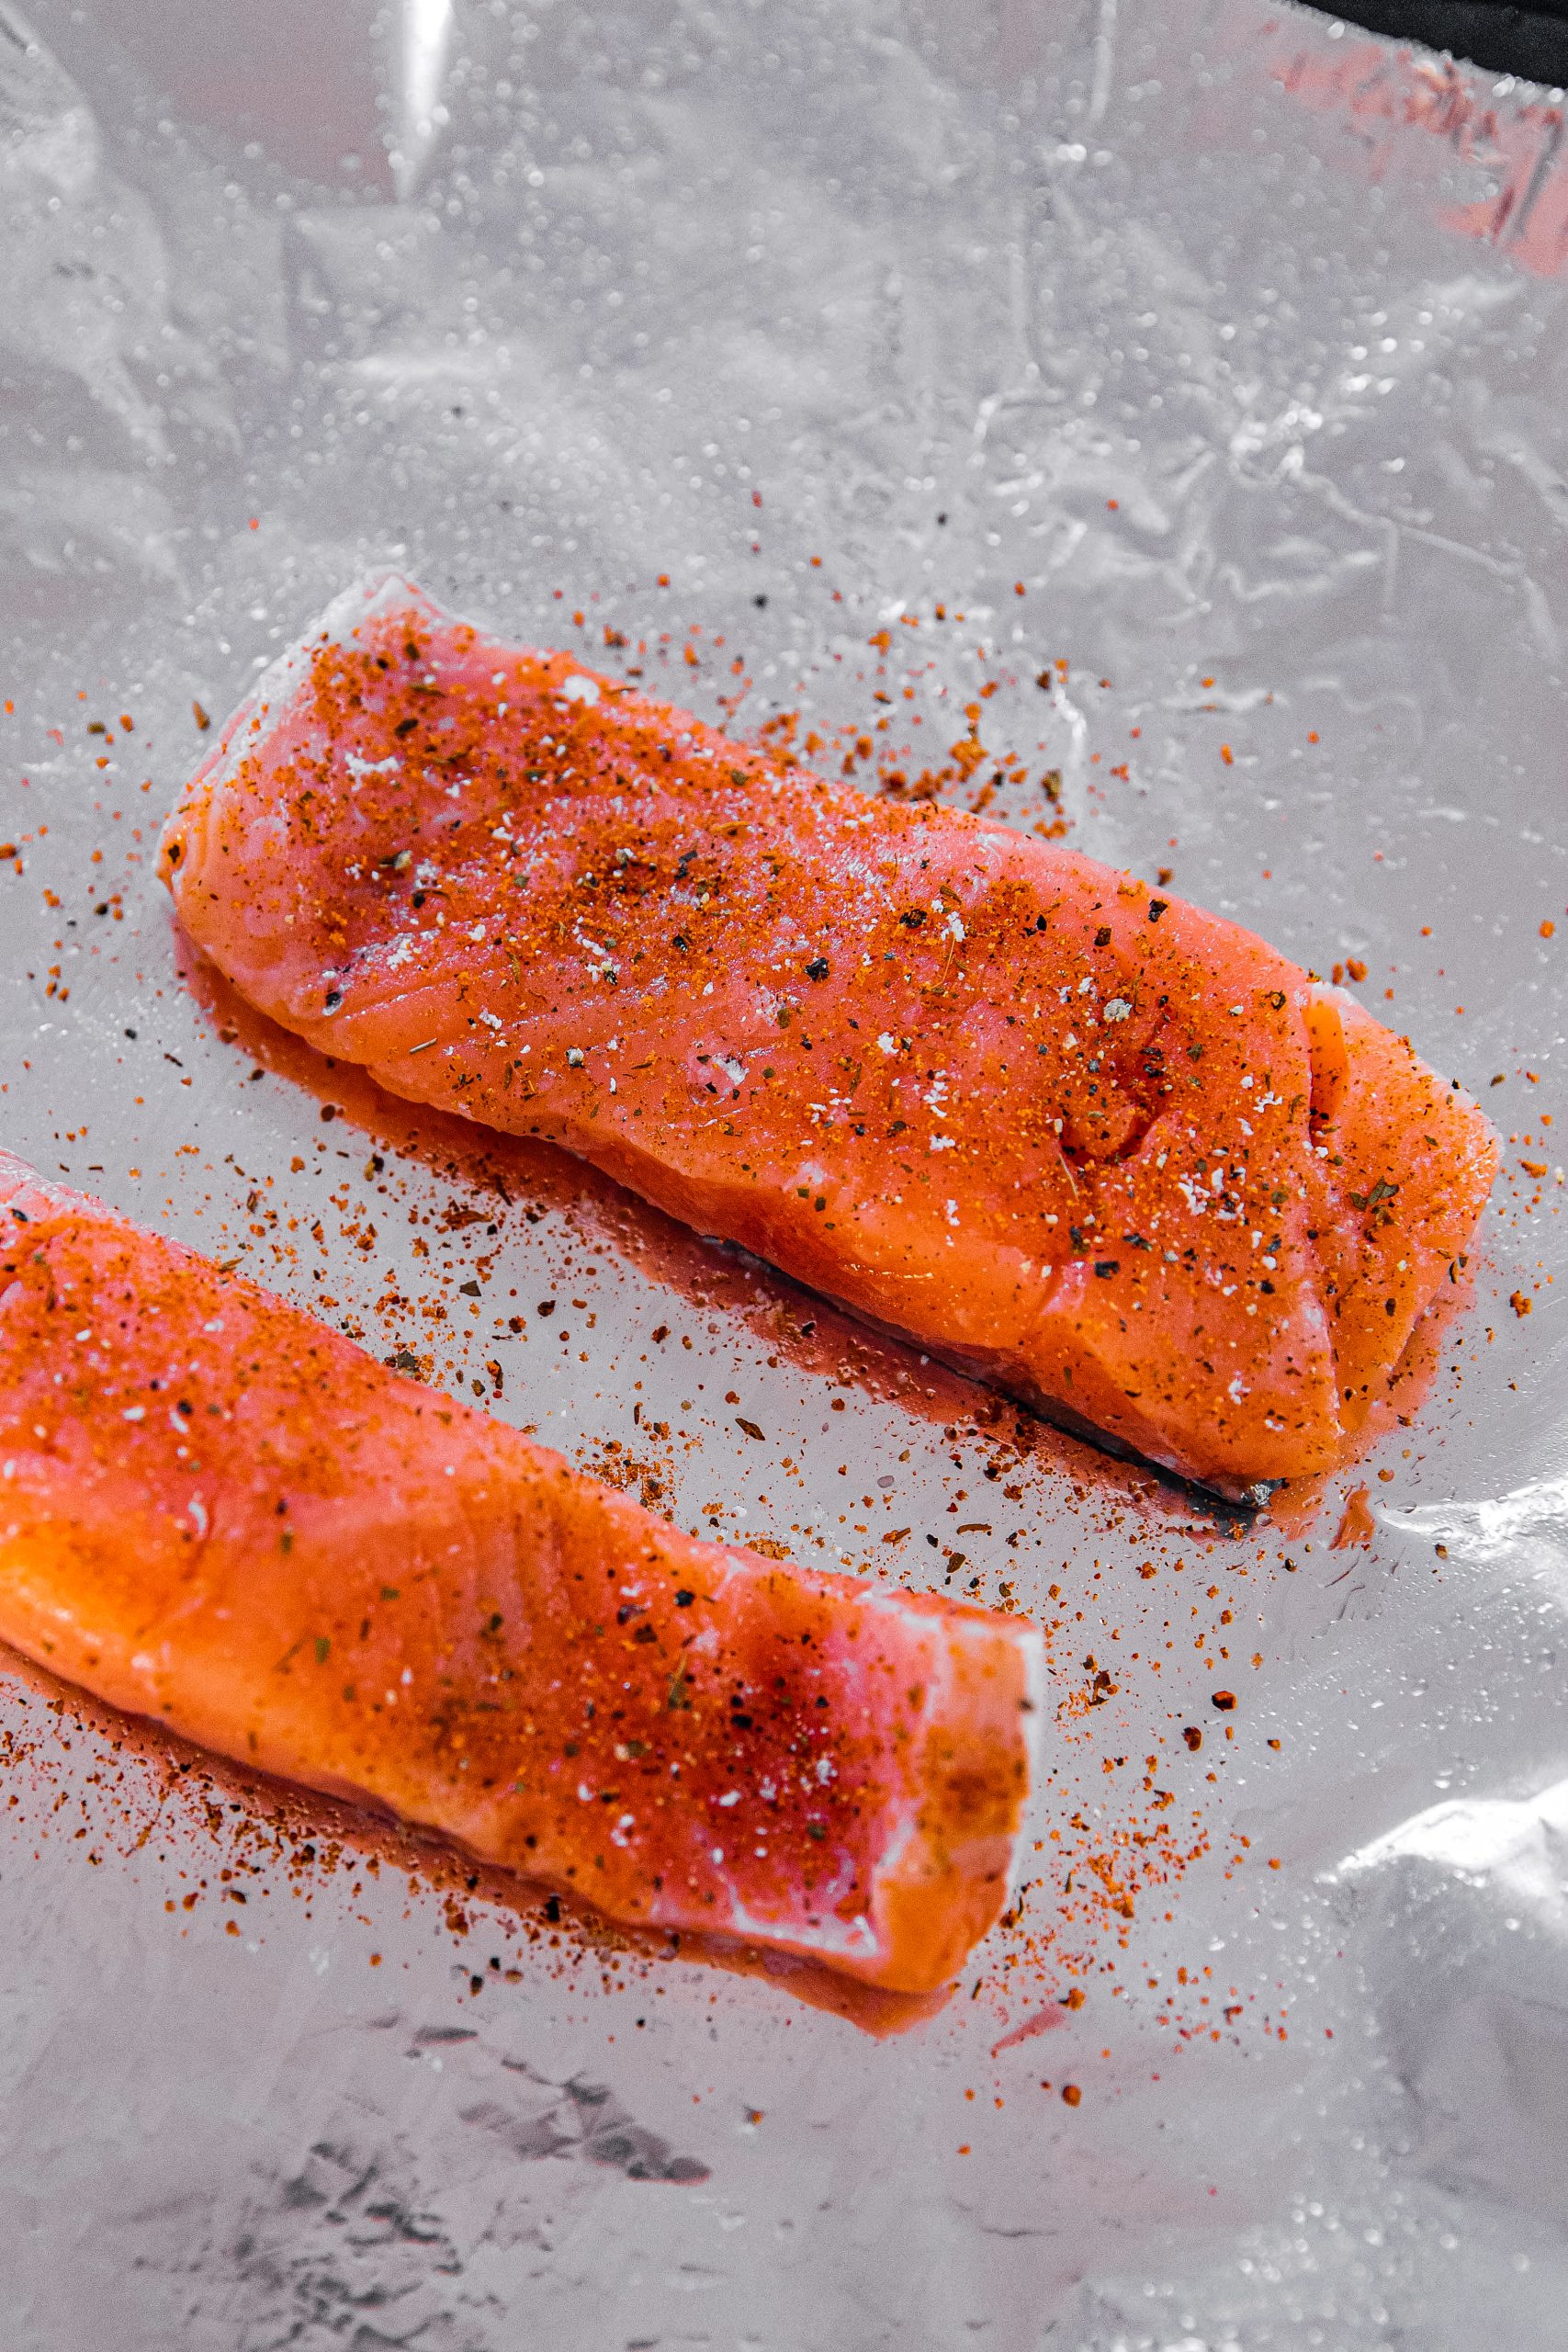  Pat the salmon dry with paper towels and place on the foil. 